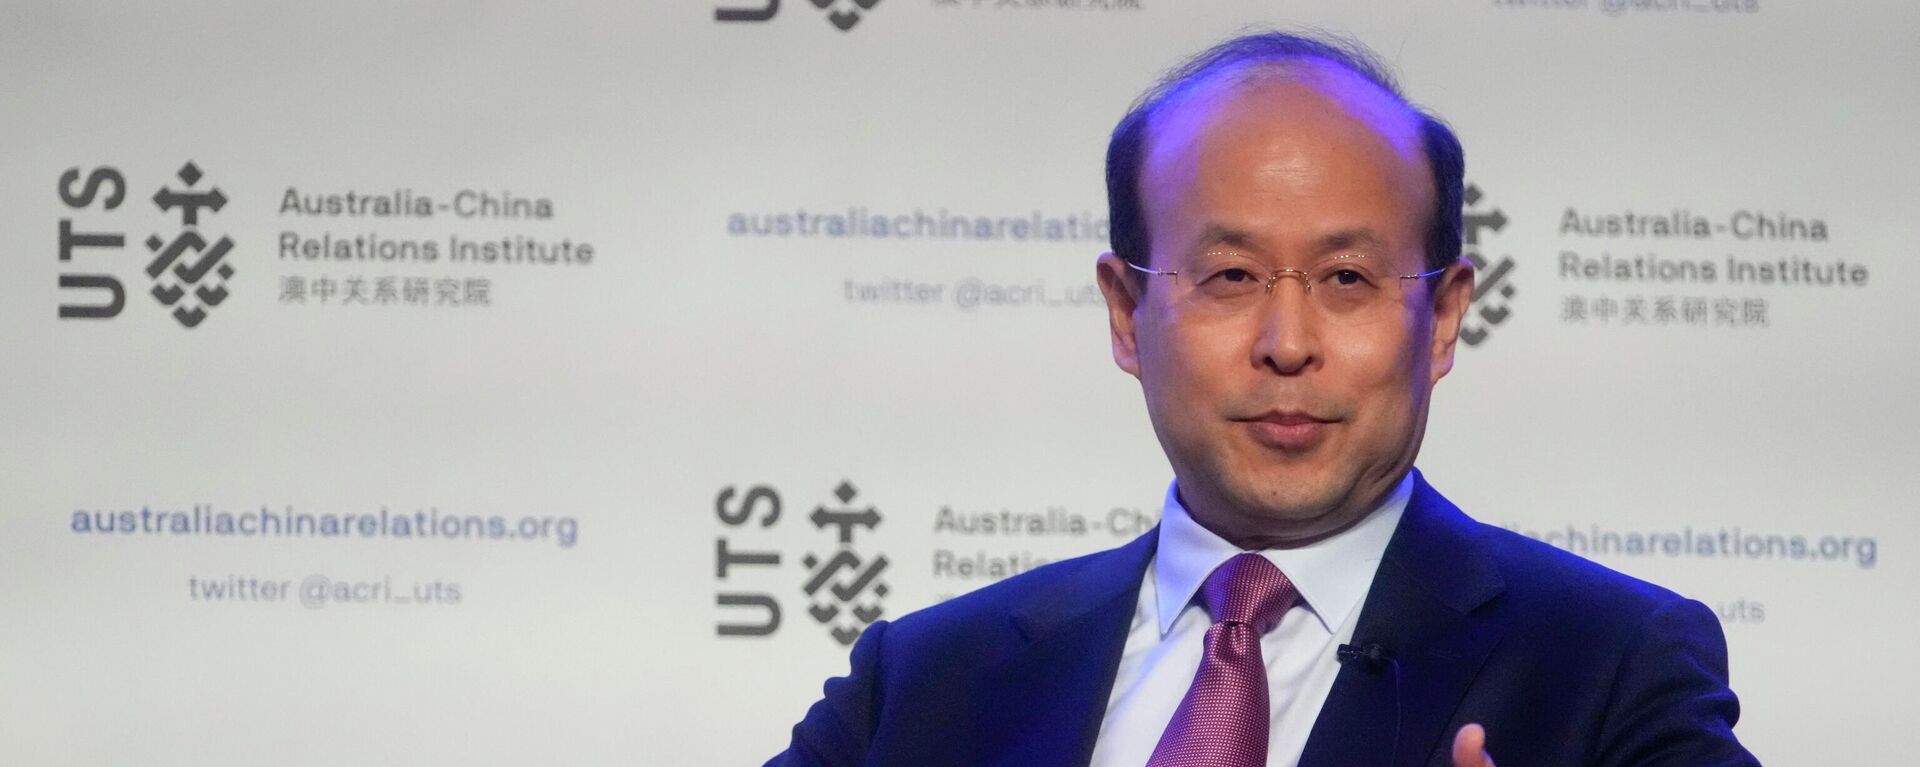 China's Ambassador to Australia, Xiao Qian gestures as he answers following his address on the state of relations between Australia and China at the University of Technology in Sydney, Australia, Friday, June 24, 2022. - Sputnik International, 1920, 10.08.2022